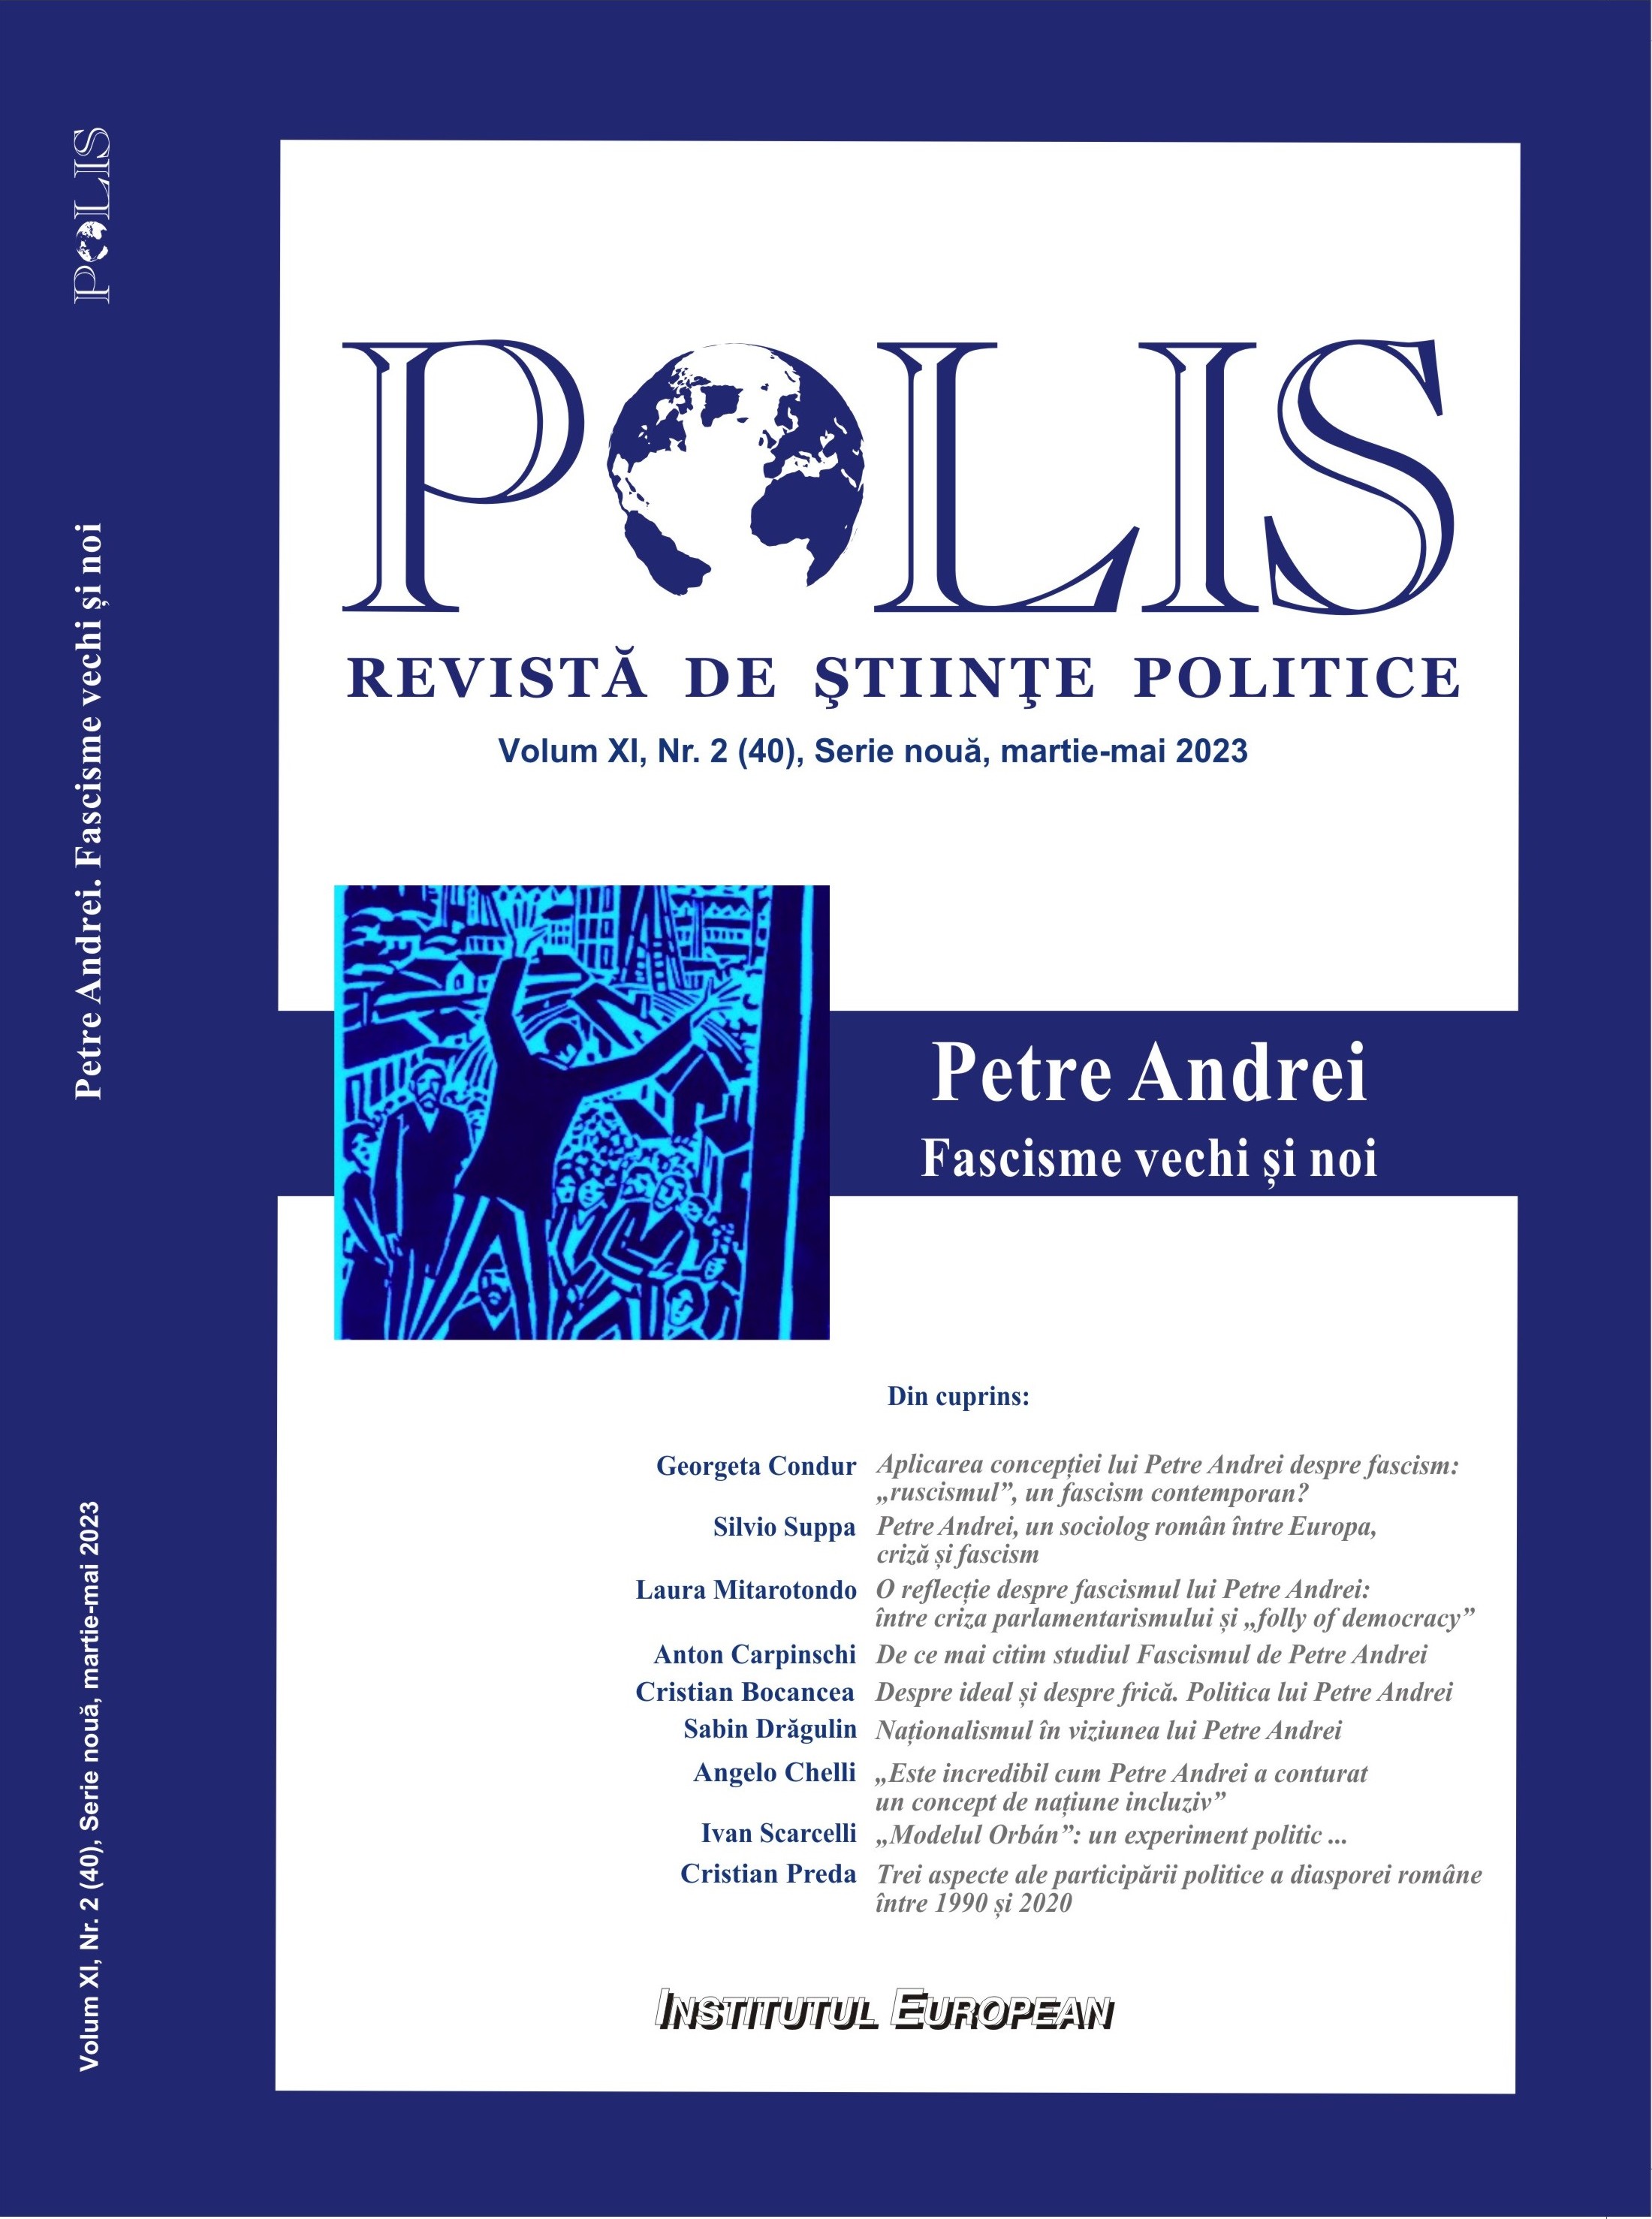 A reflection on Petre Andrei’s Fascism: 
between the crisis of parliamentarism and the “folly of democracy”